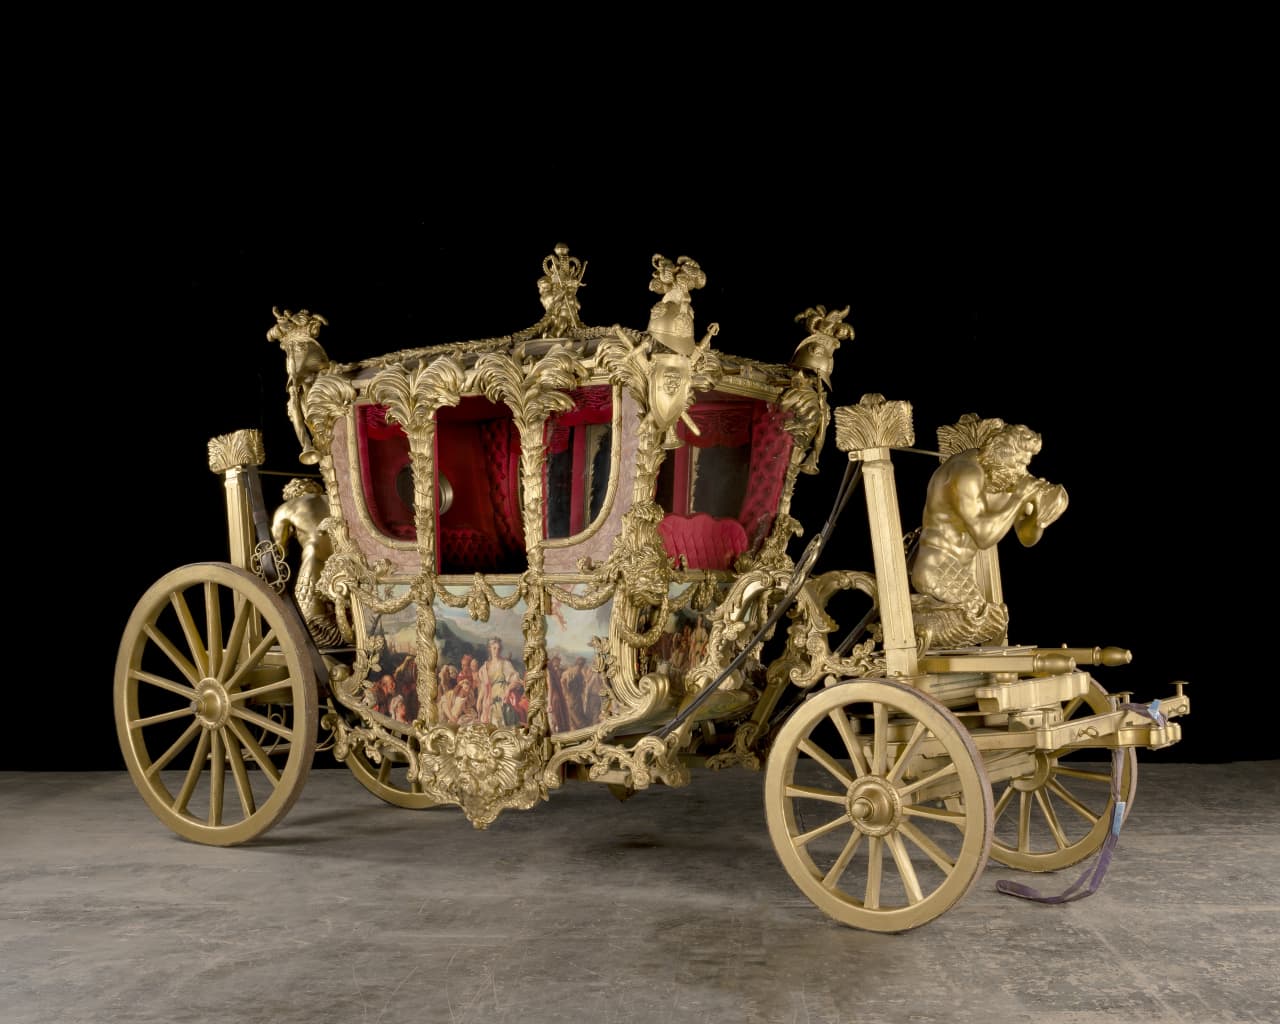 A reproduction of the Gold State Coach. Estimate: £30,000-50,000 Courtesy of Bonhams